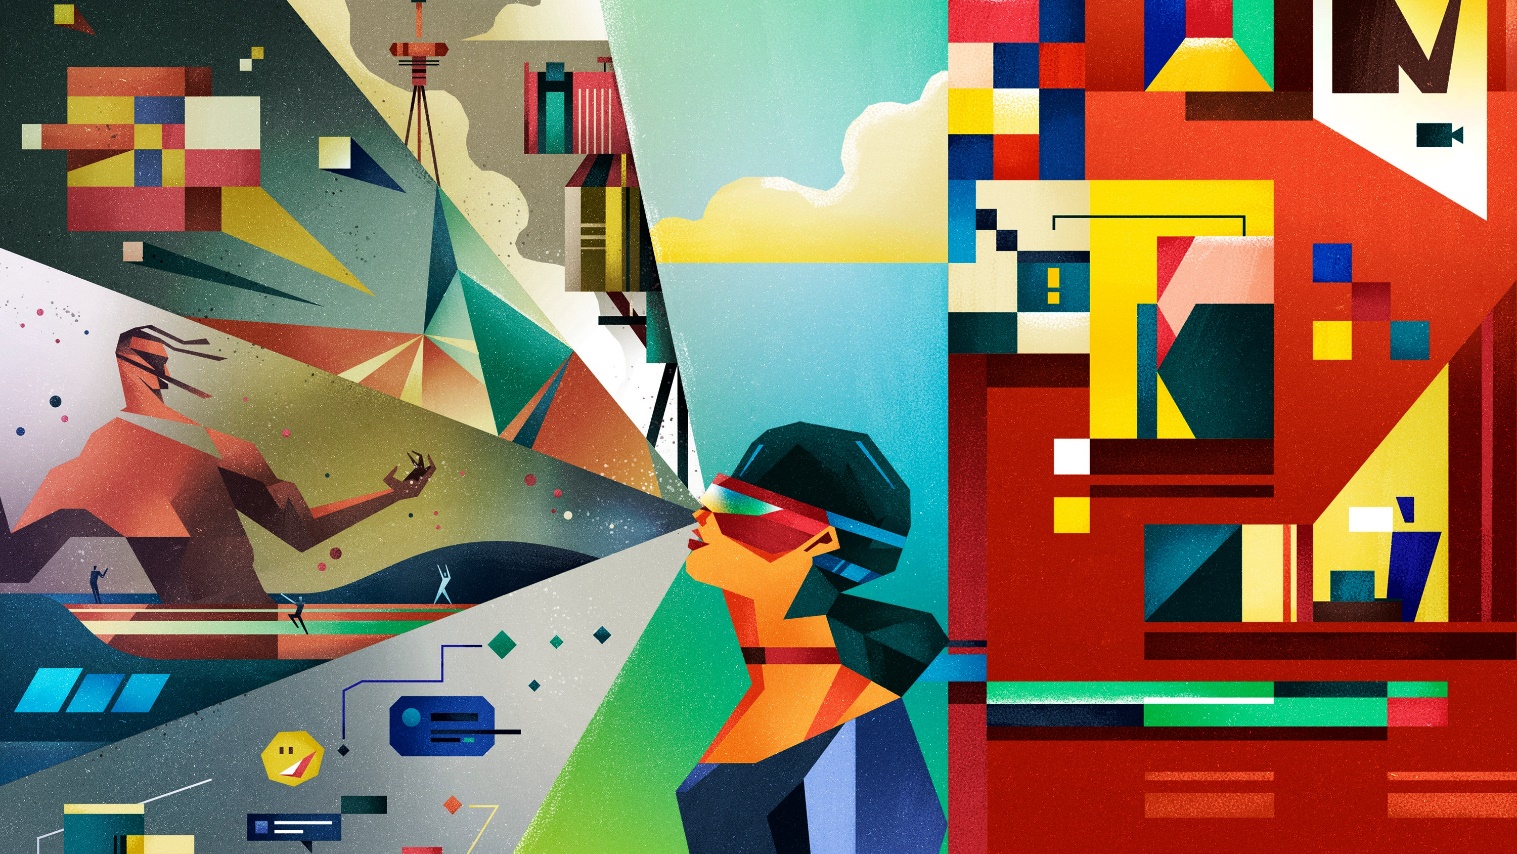 The Metaverse Is Simply Big Tech, but Bigger | WIRED